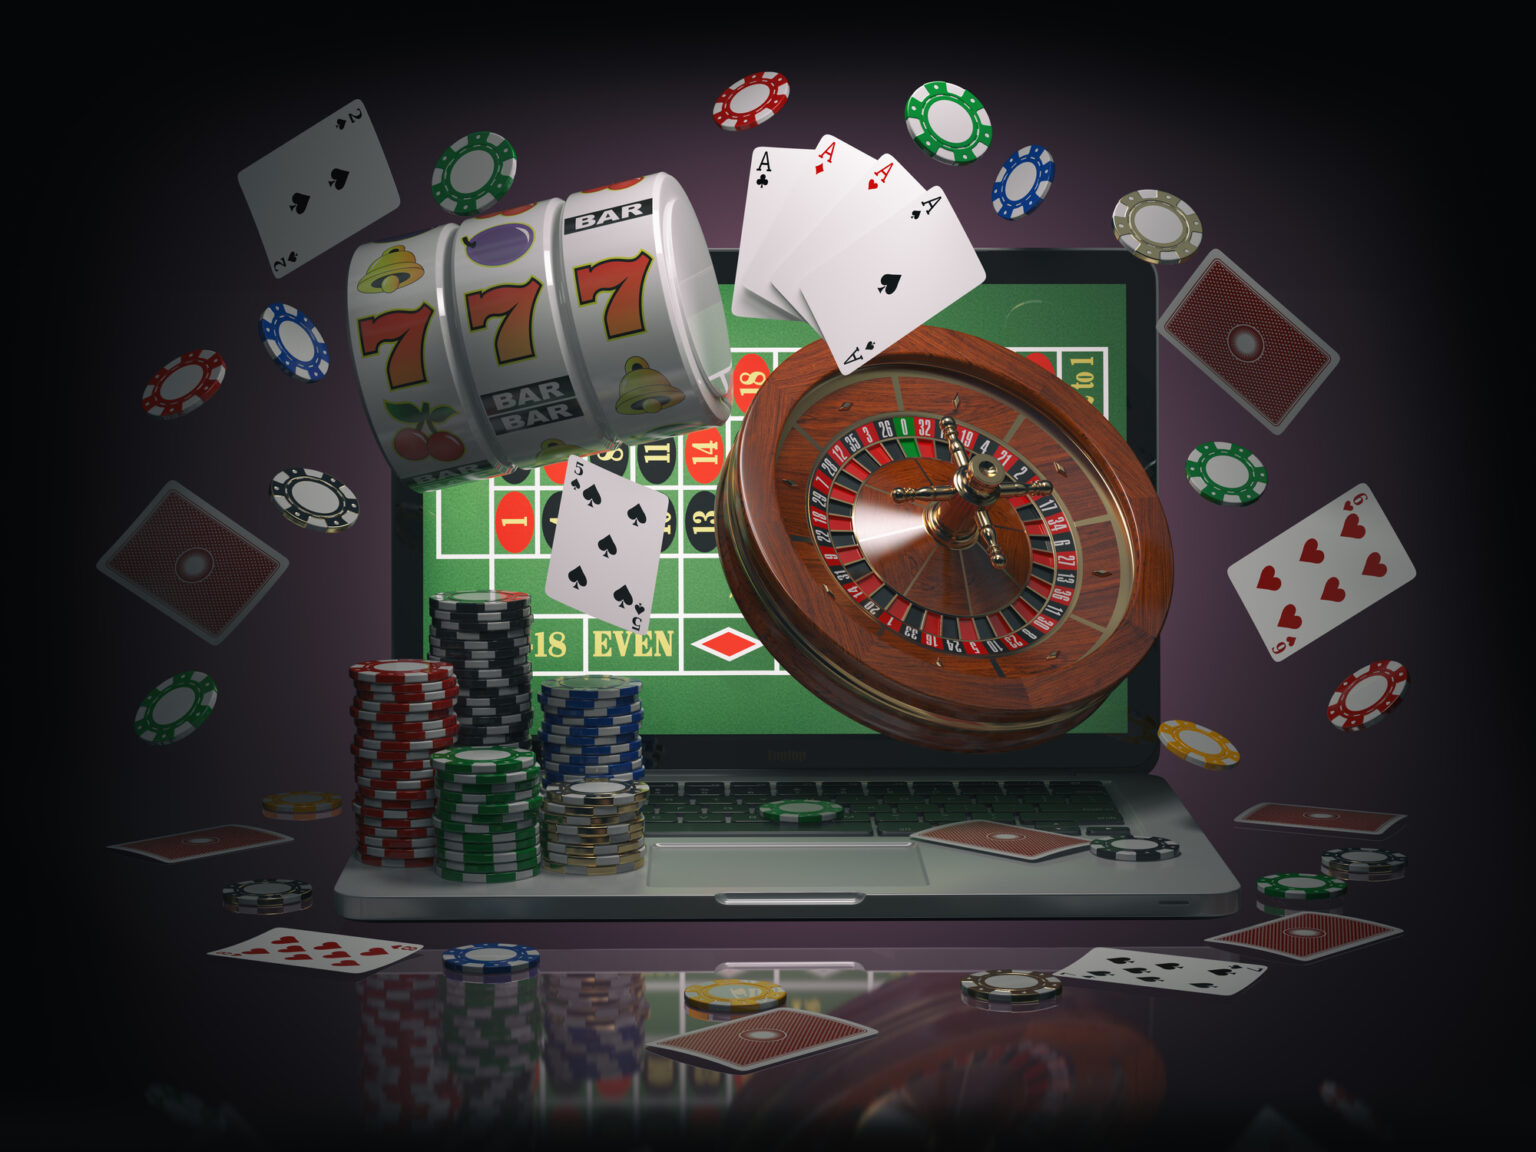 best paying online casino